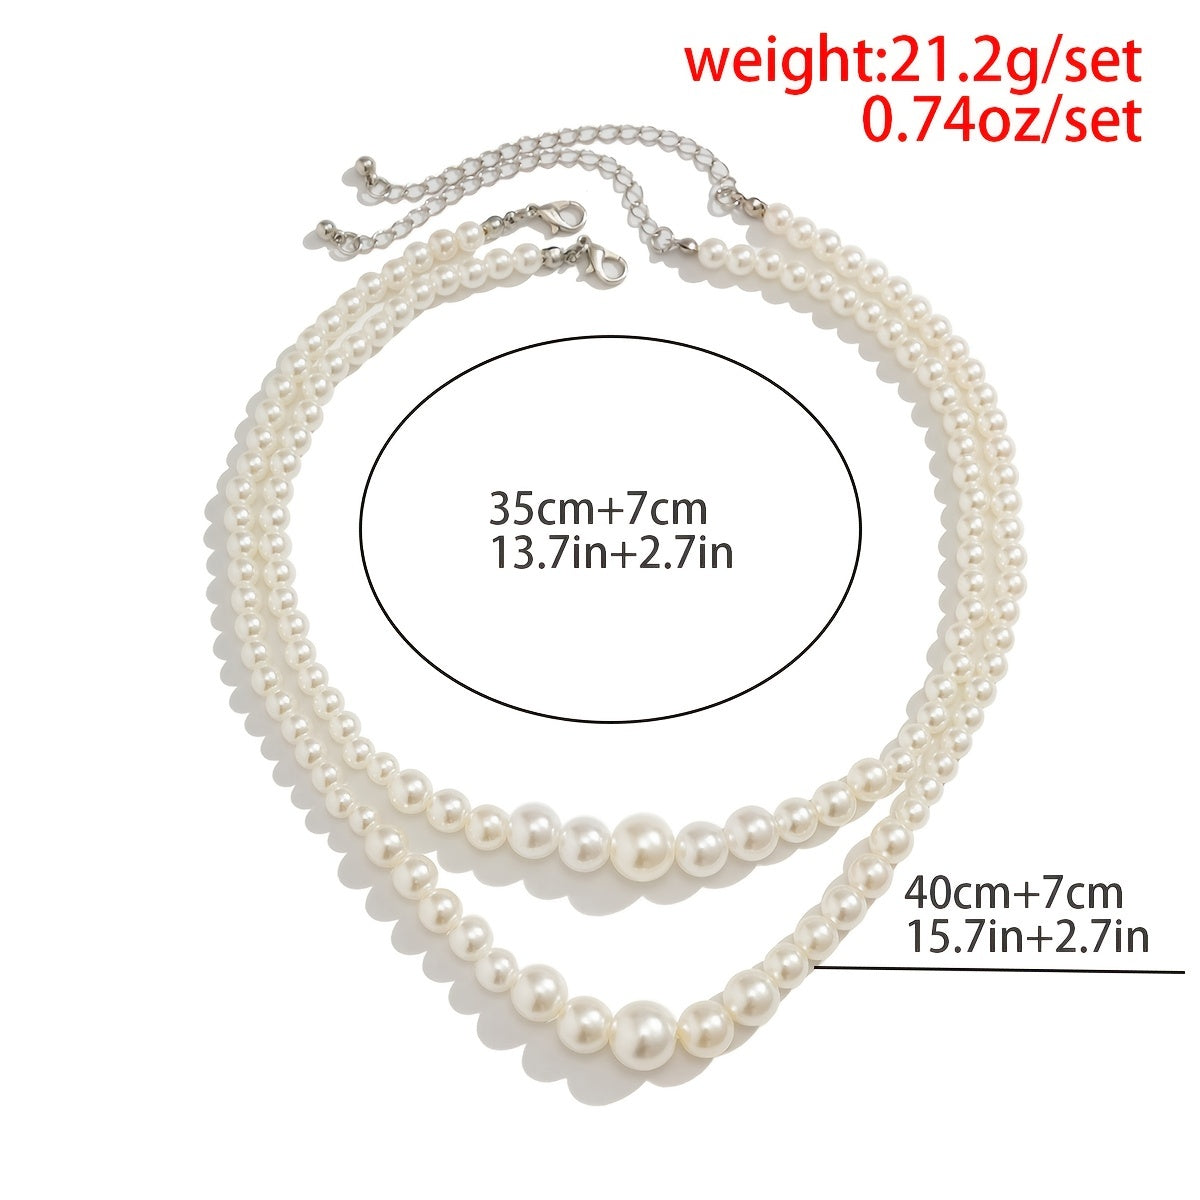 2-Piece Pearl Beading Set: Add a Touch of Elegance to Your Look with These Trendy Jewelry Accessories!